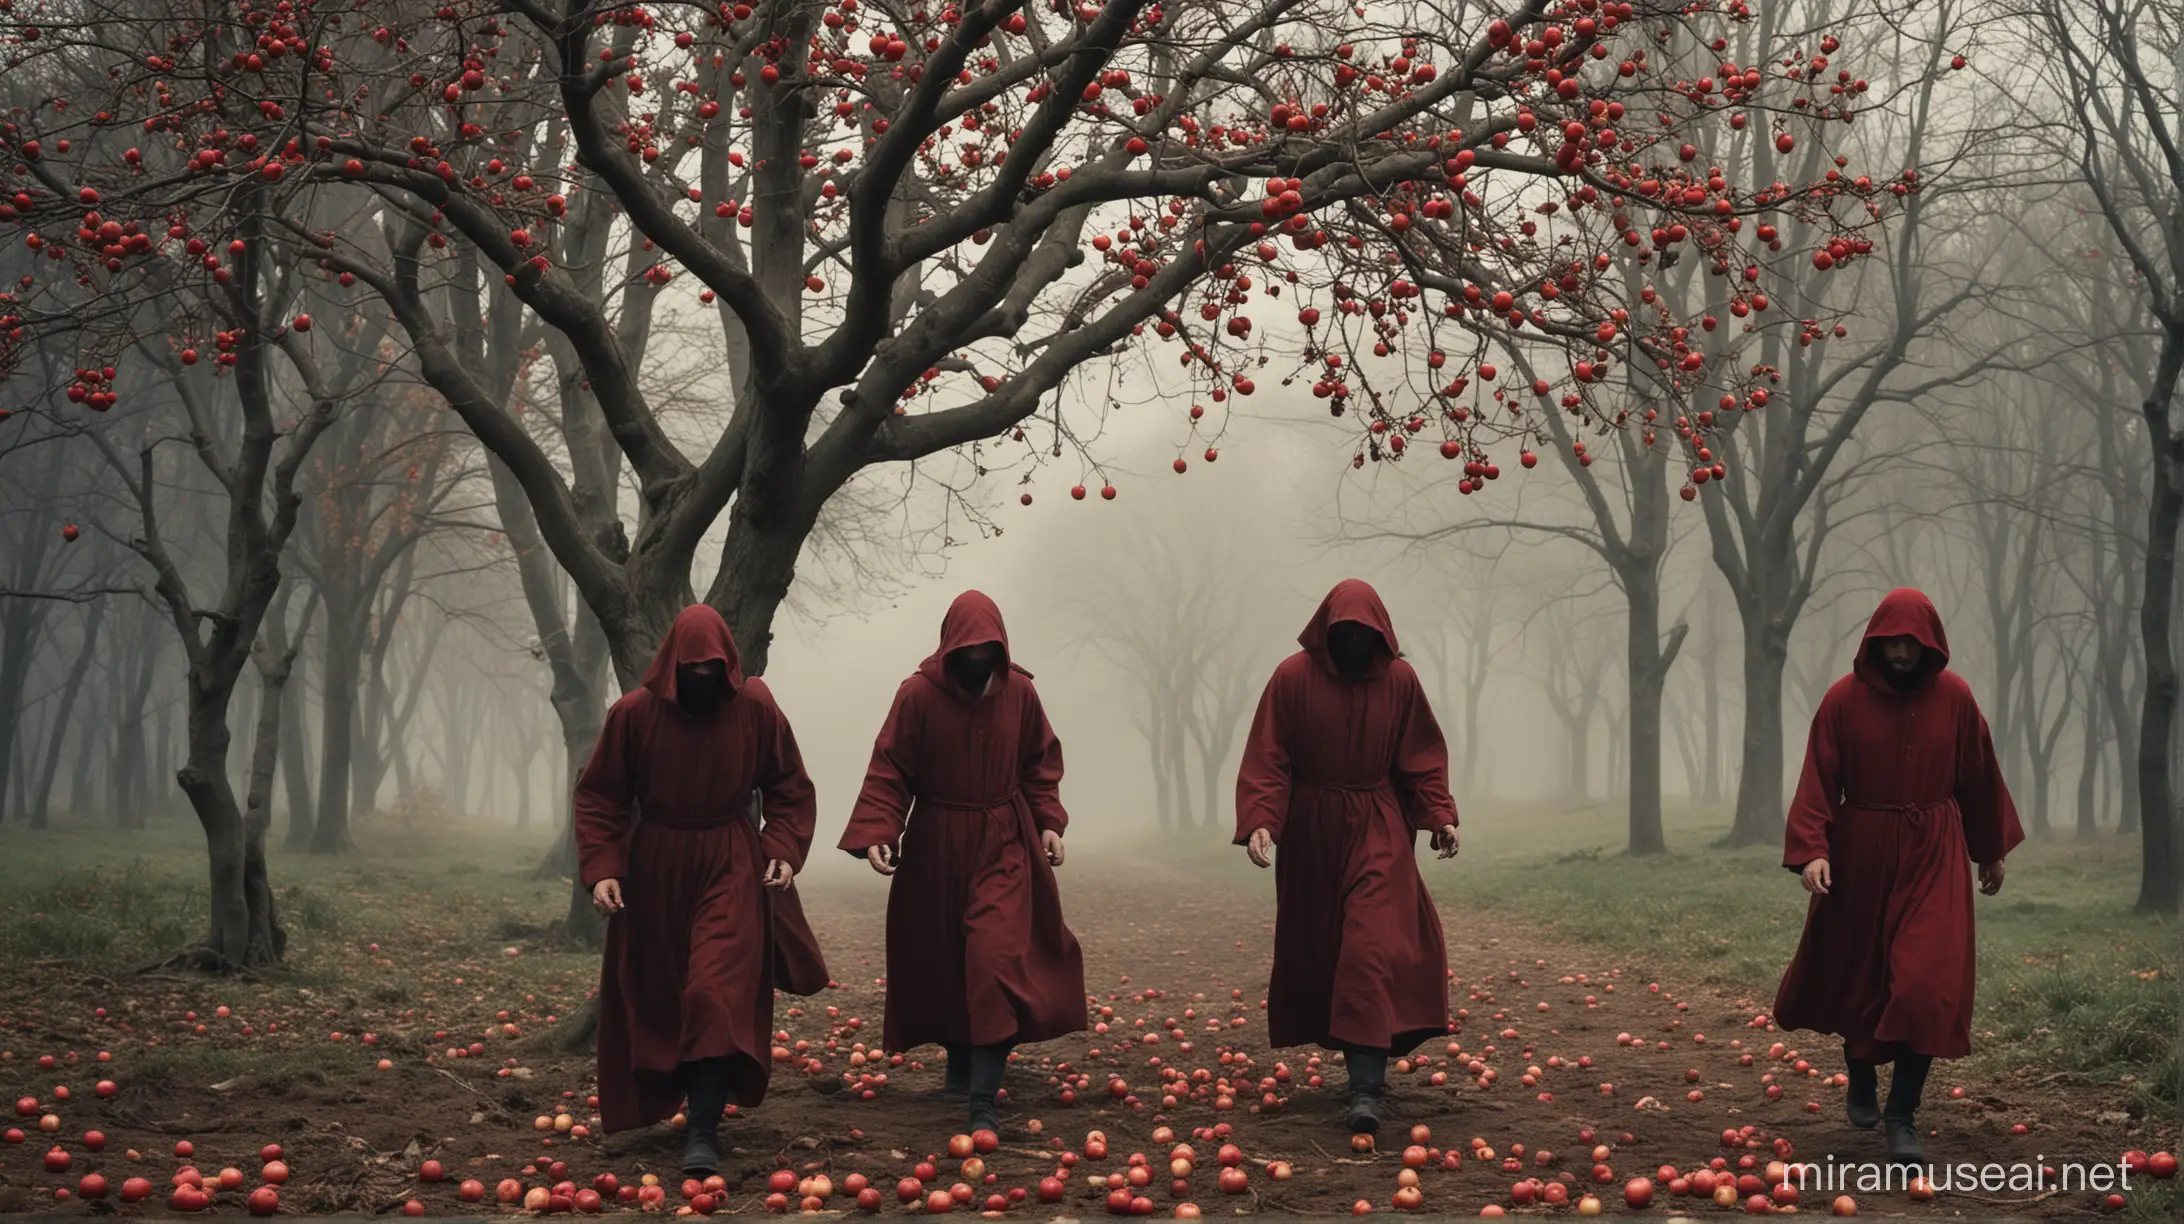 3 Antichrists are fleeing towards a tree with red apples.